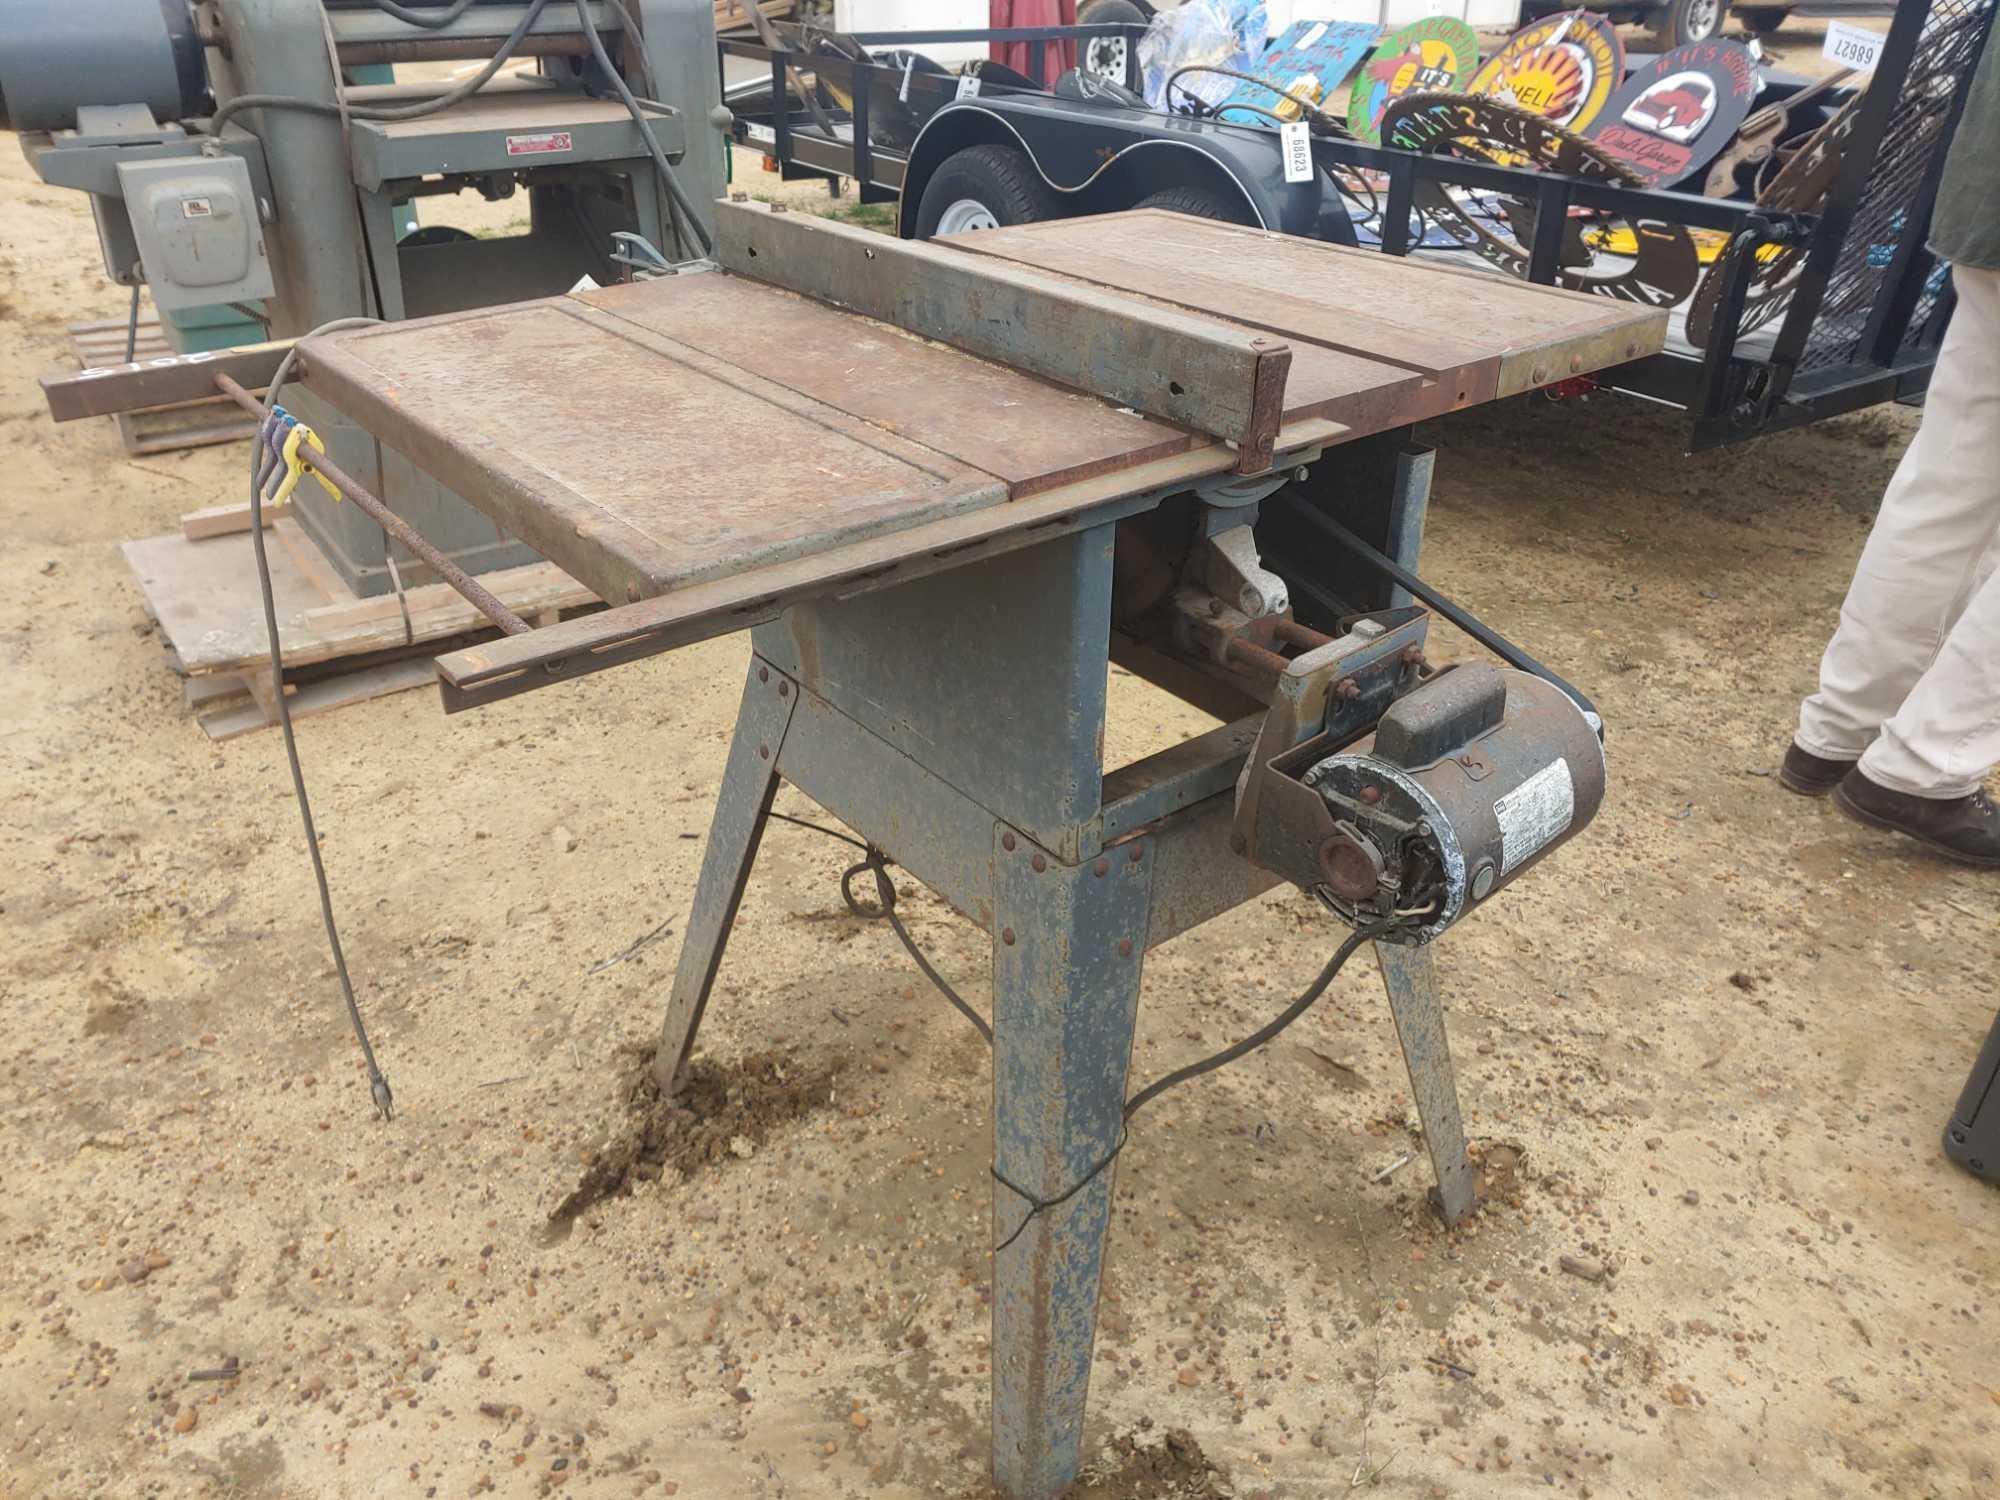 CRAFTSMAN 10 INCH TABLE SAW